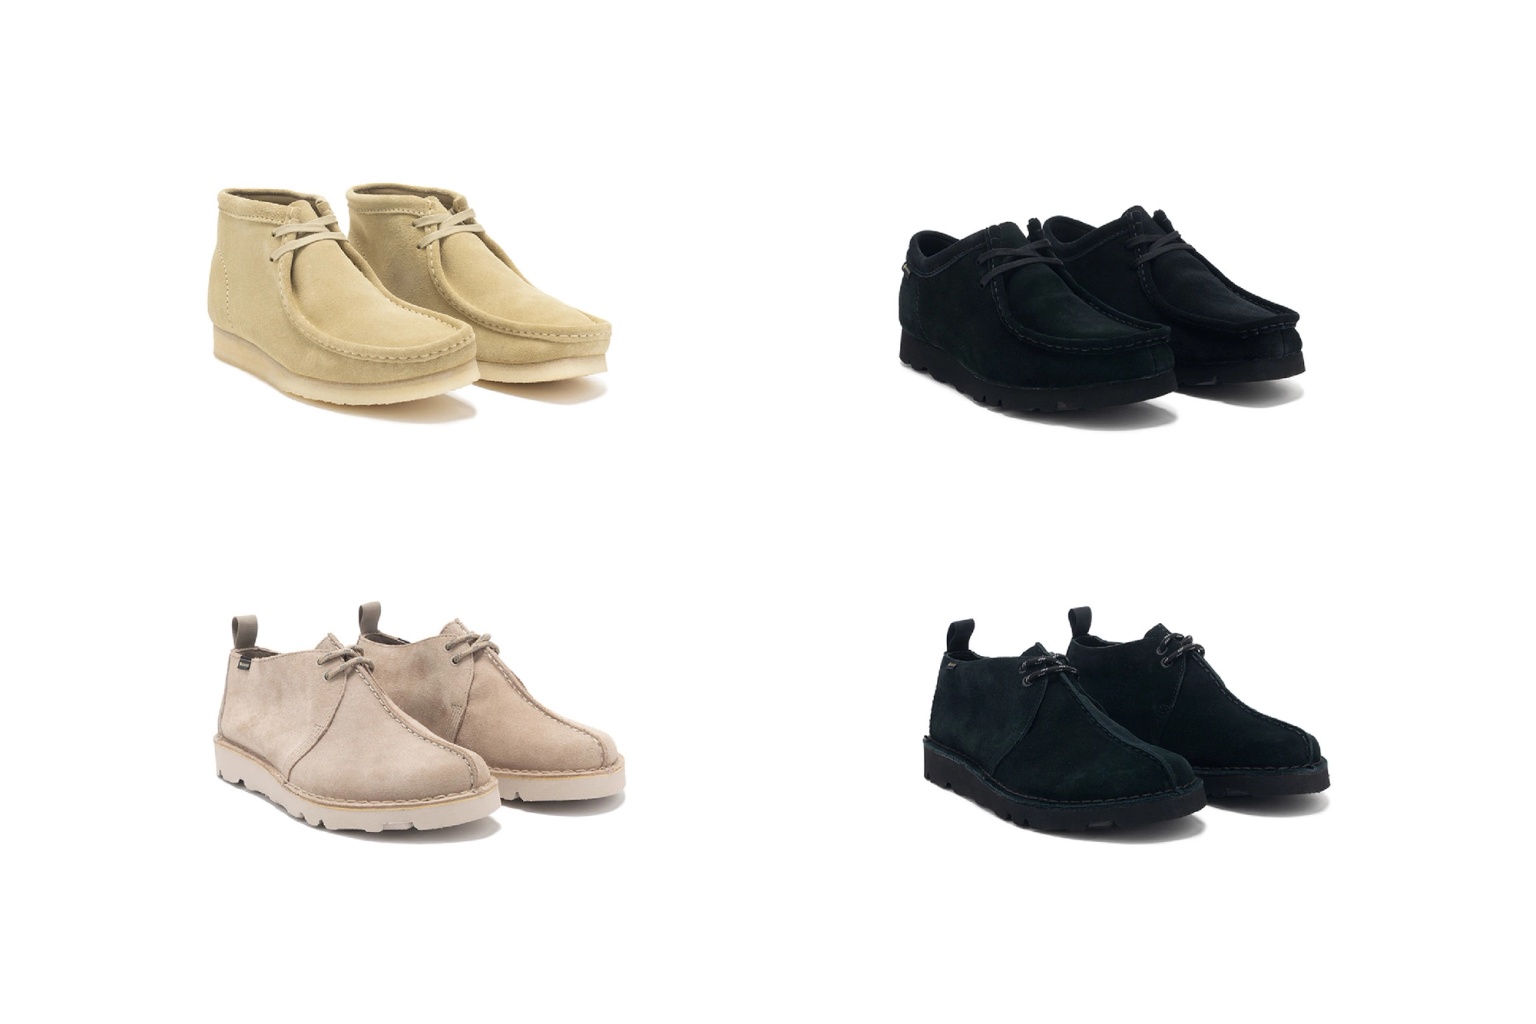 Clarks Originals FW22 Footwear | Now Available